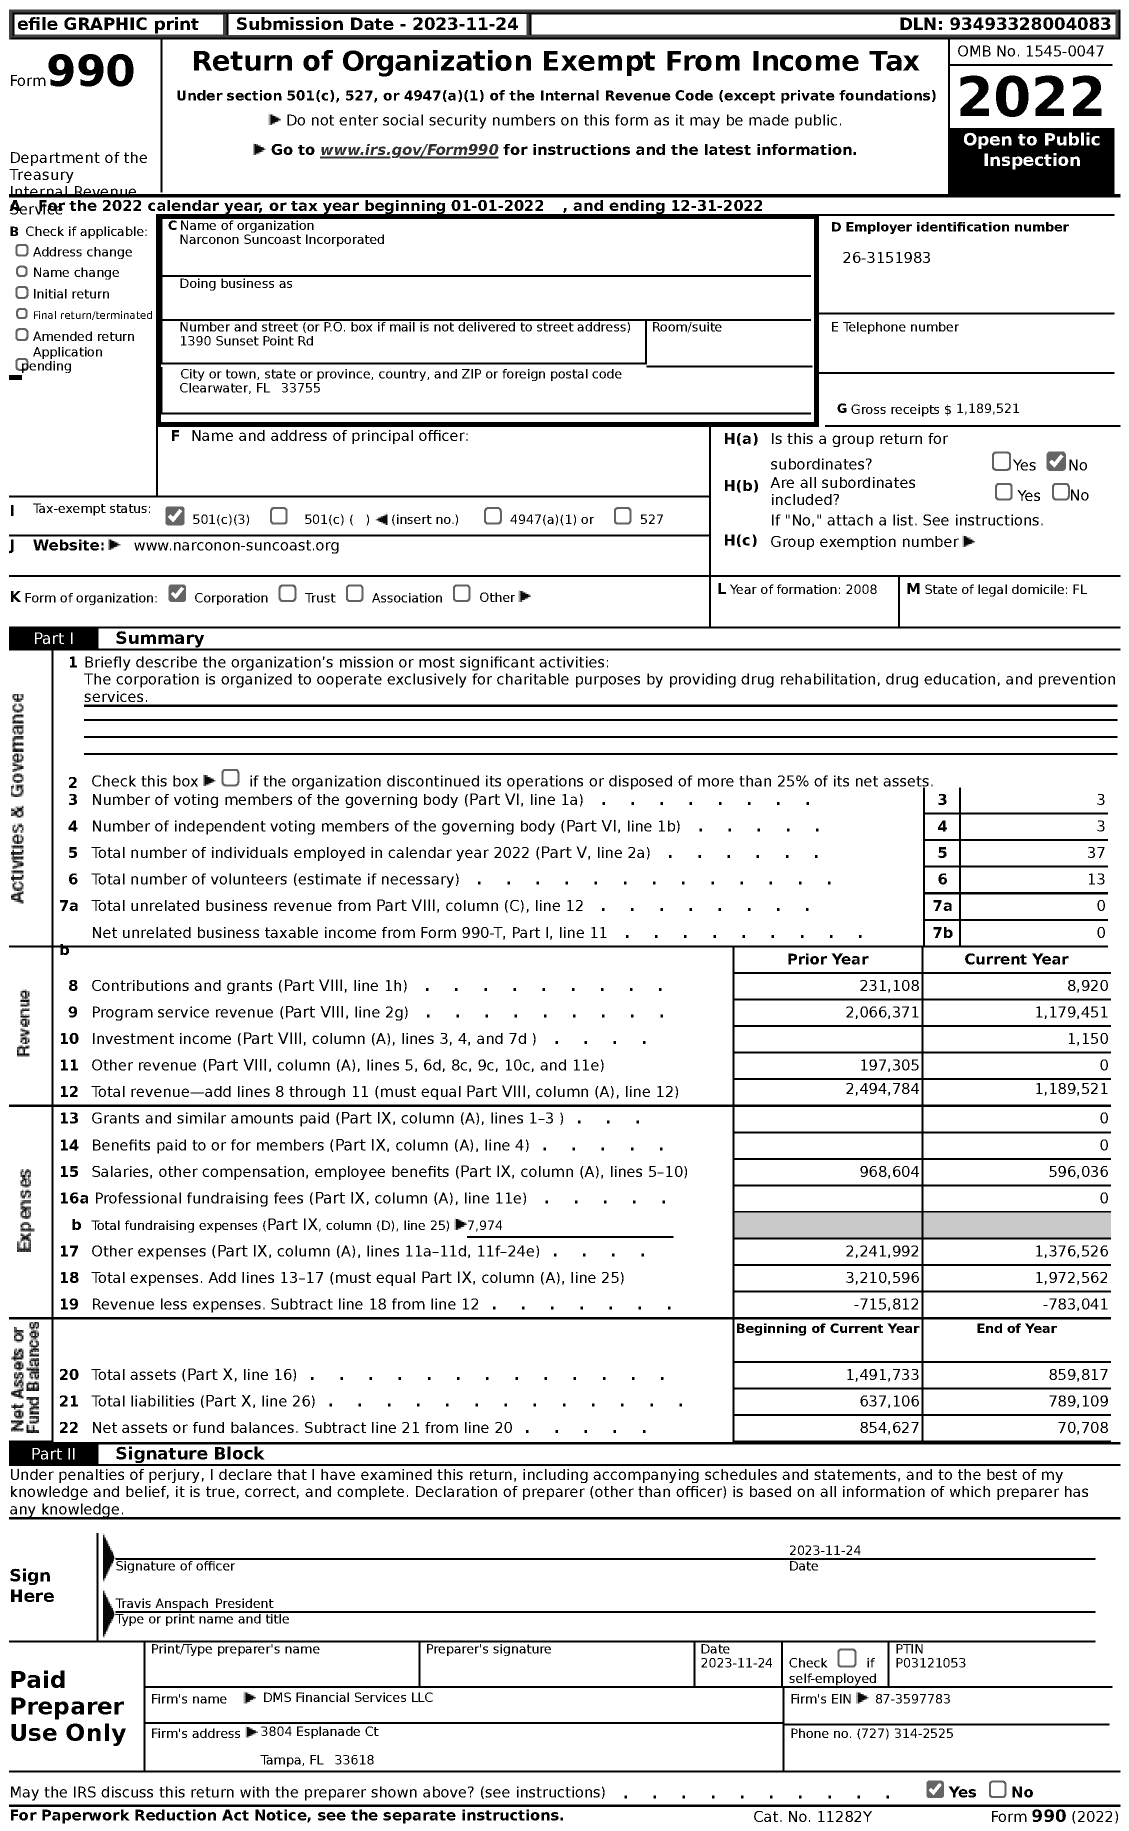 Image of first page of 2022 Form 990 for Narconon Suncoast Incorporated